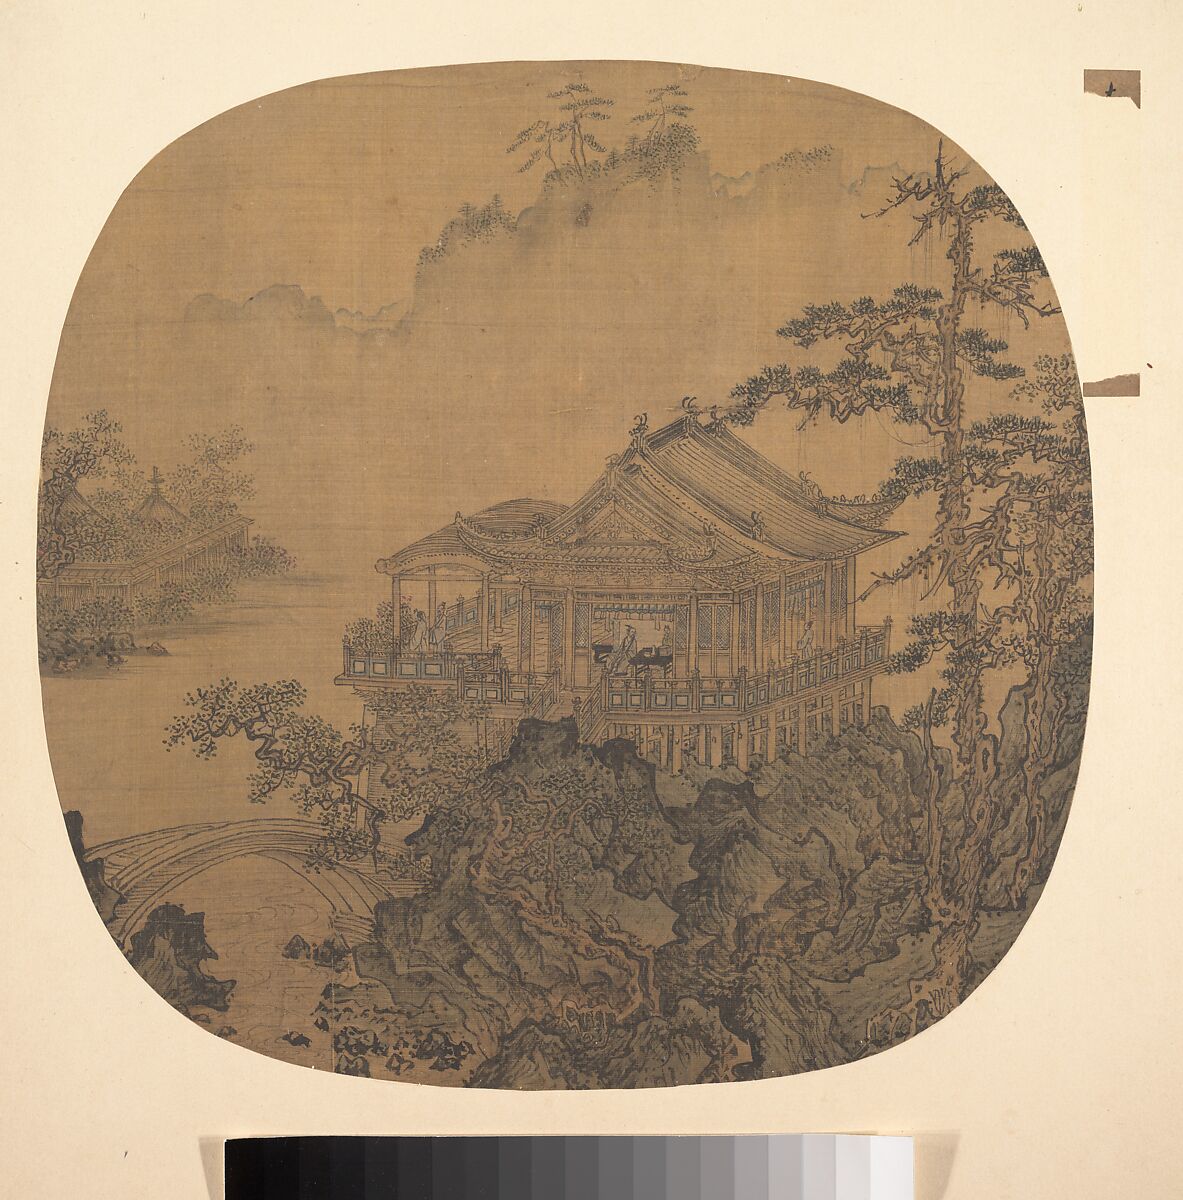 Pavilion on a pond, Unidentified artist  , 16th or 17th century, Fan mounted as an album leaf; ink and color on silk, China 